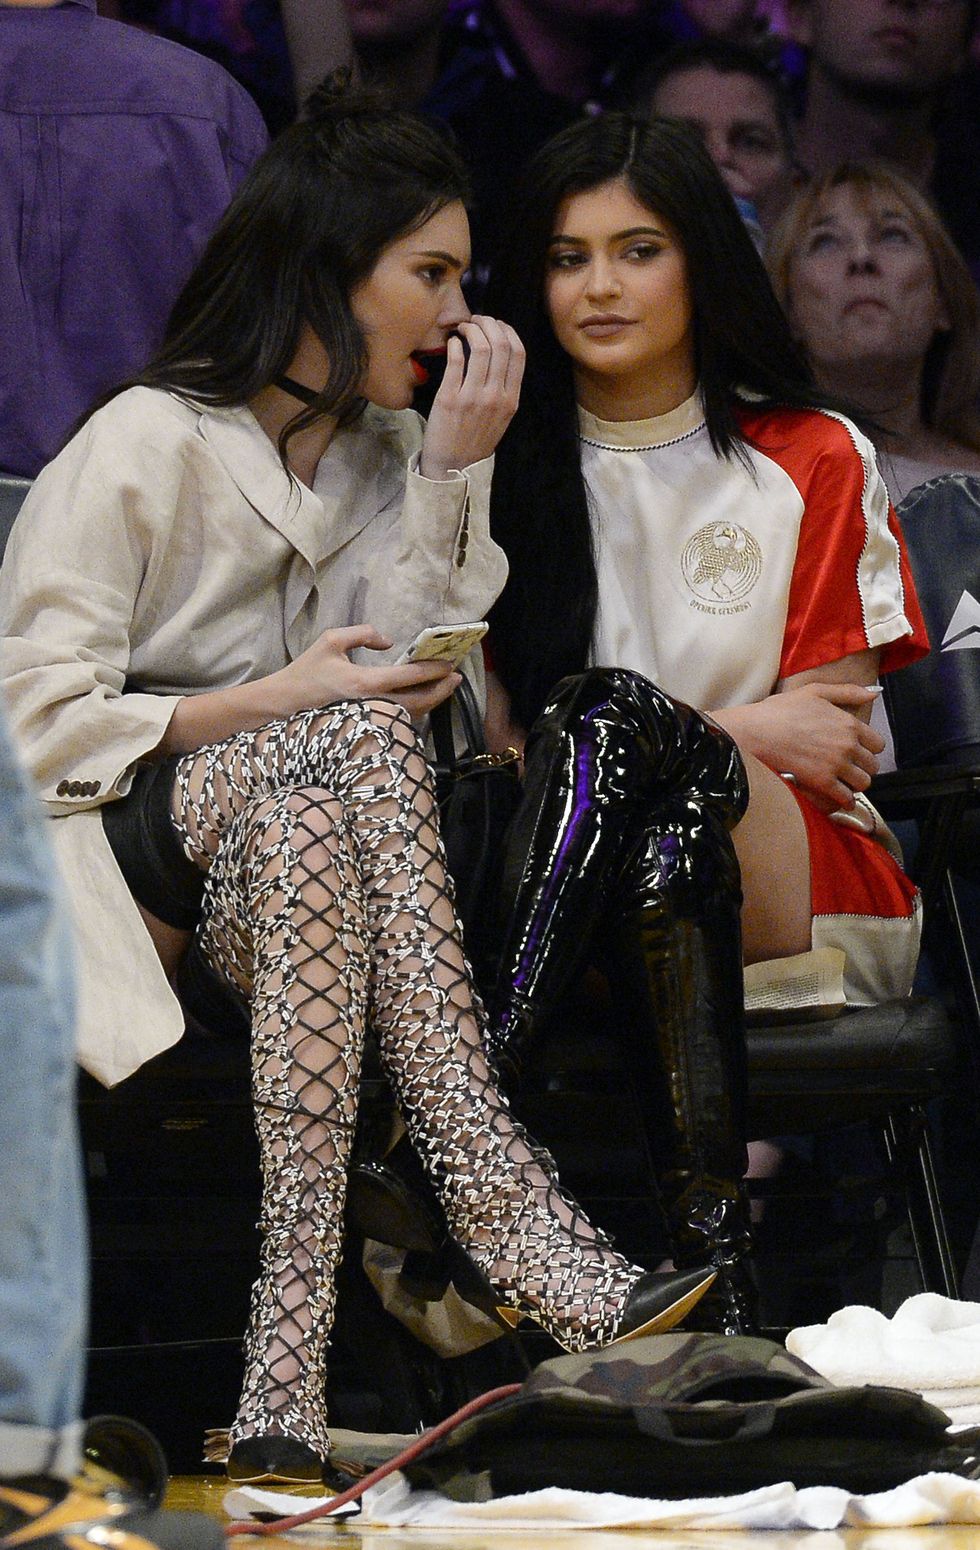 Kendall Jenner and Kylie Jenner at the basketball